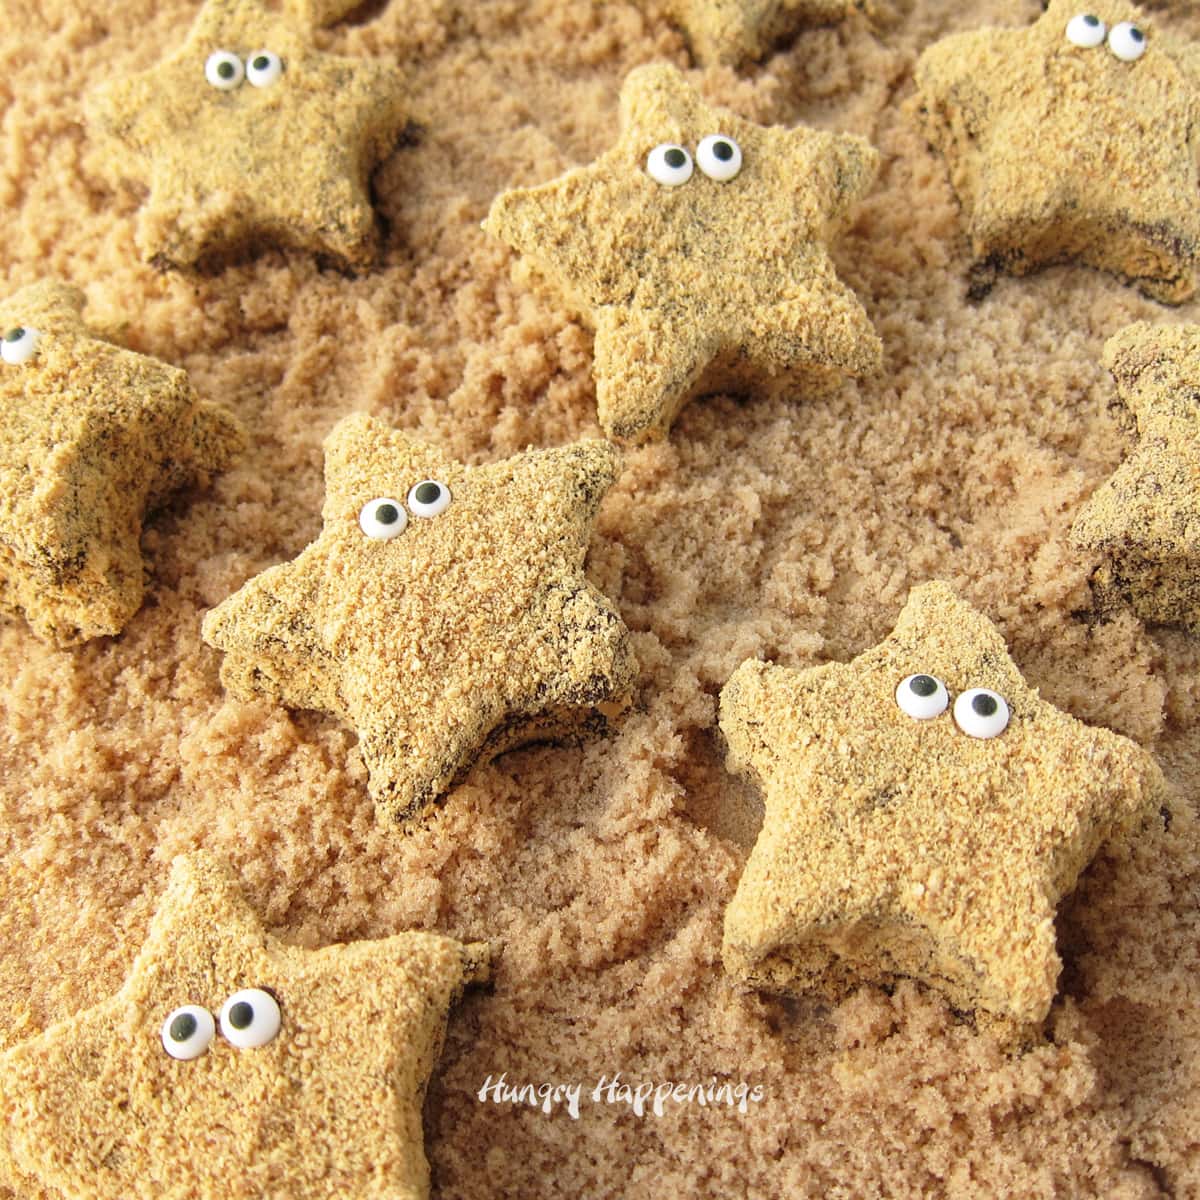 star-shaped marshmallows dipped in chocolate and coated with graham crackers are decorated with candy eyes to look like starfish.